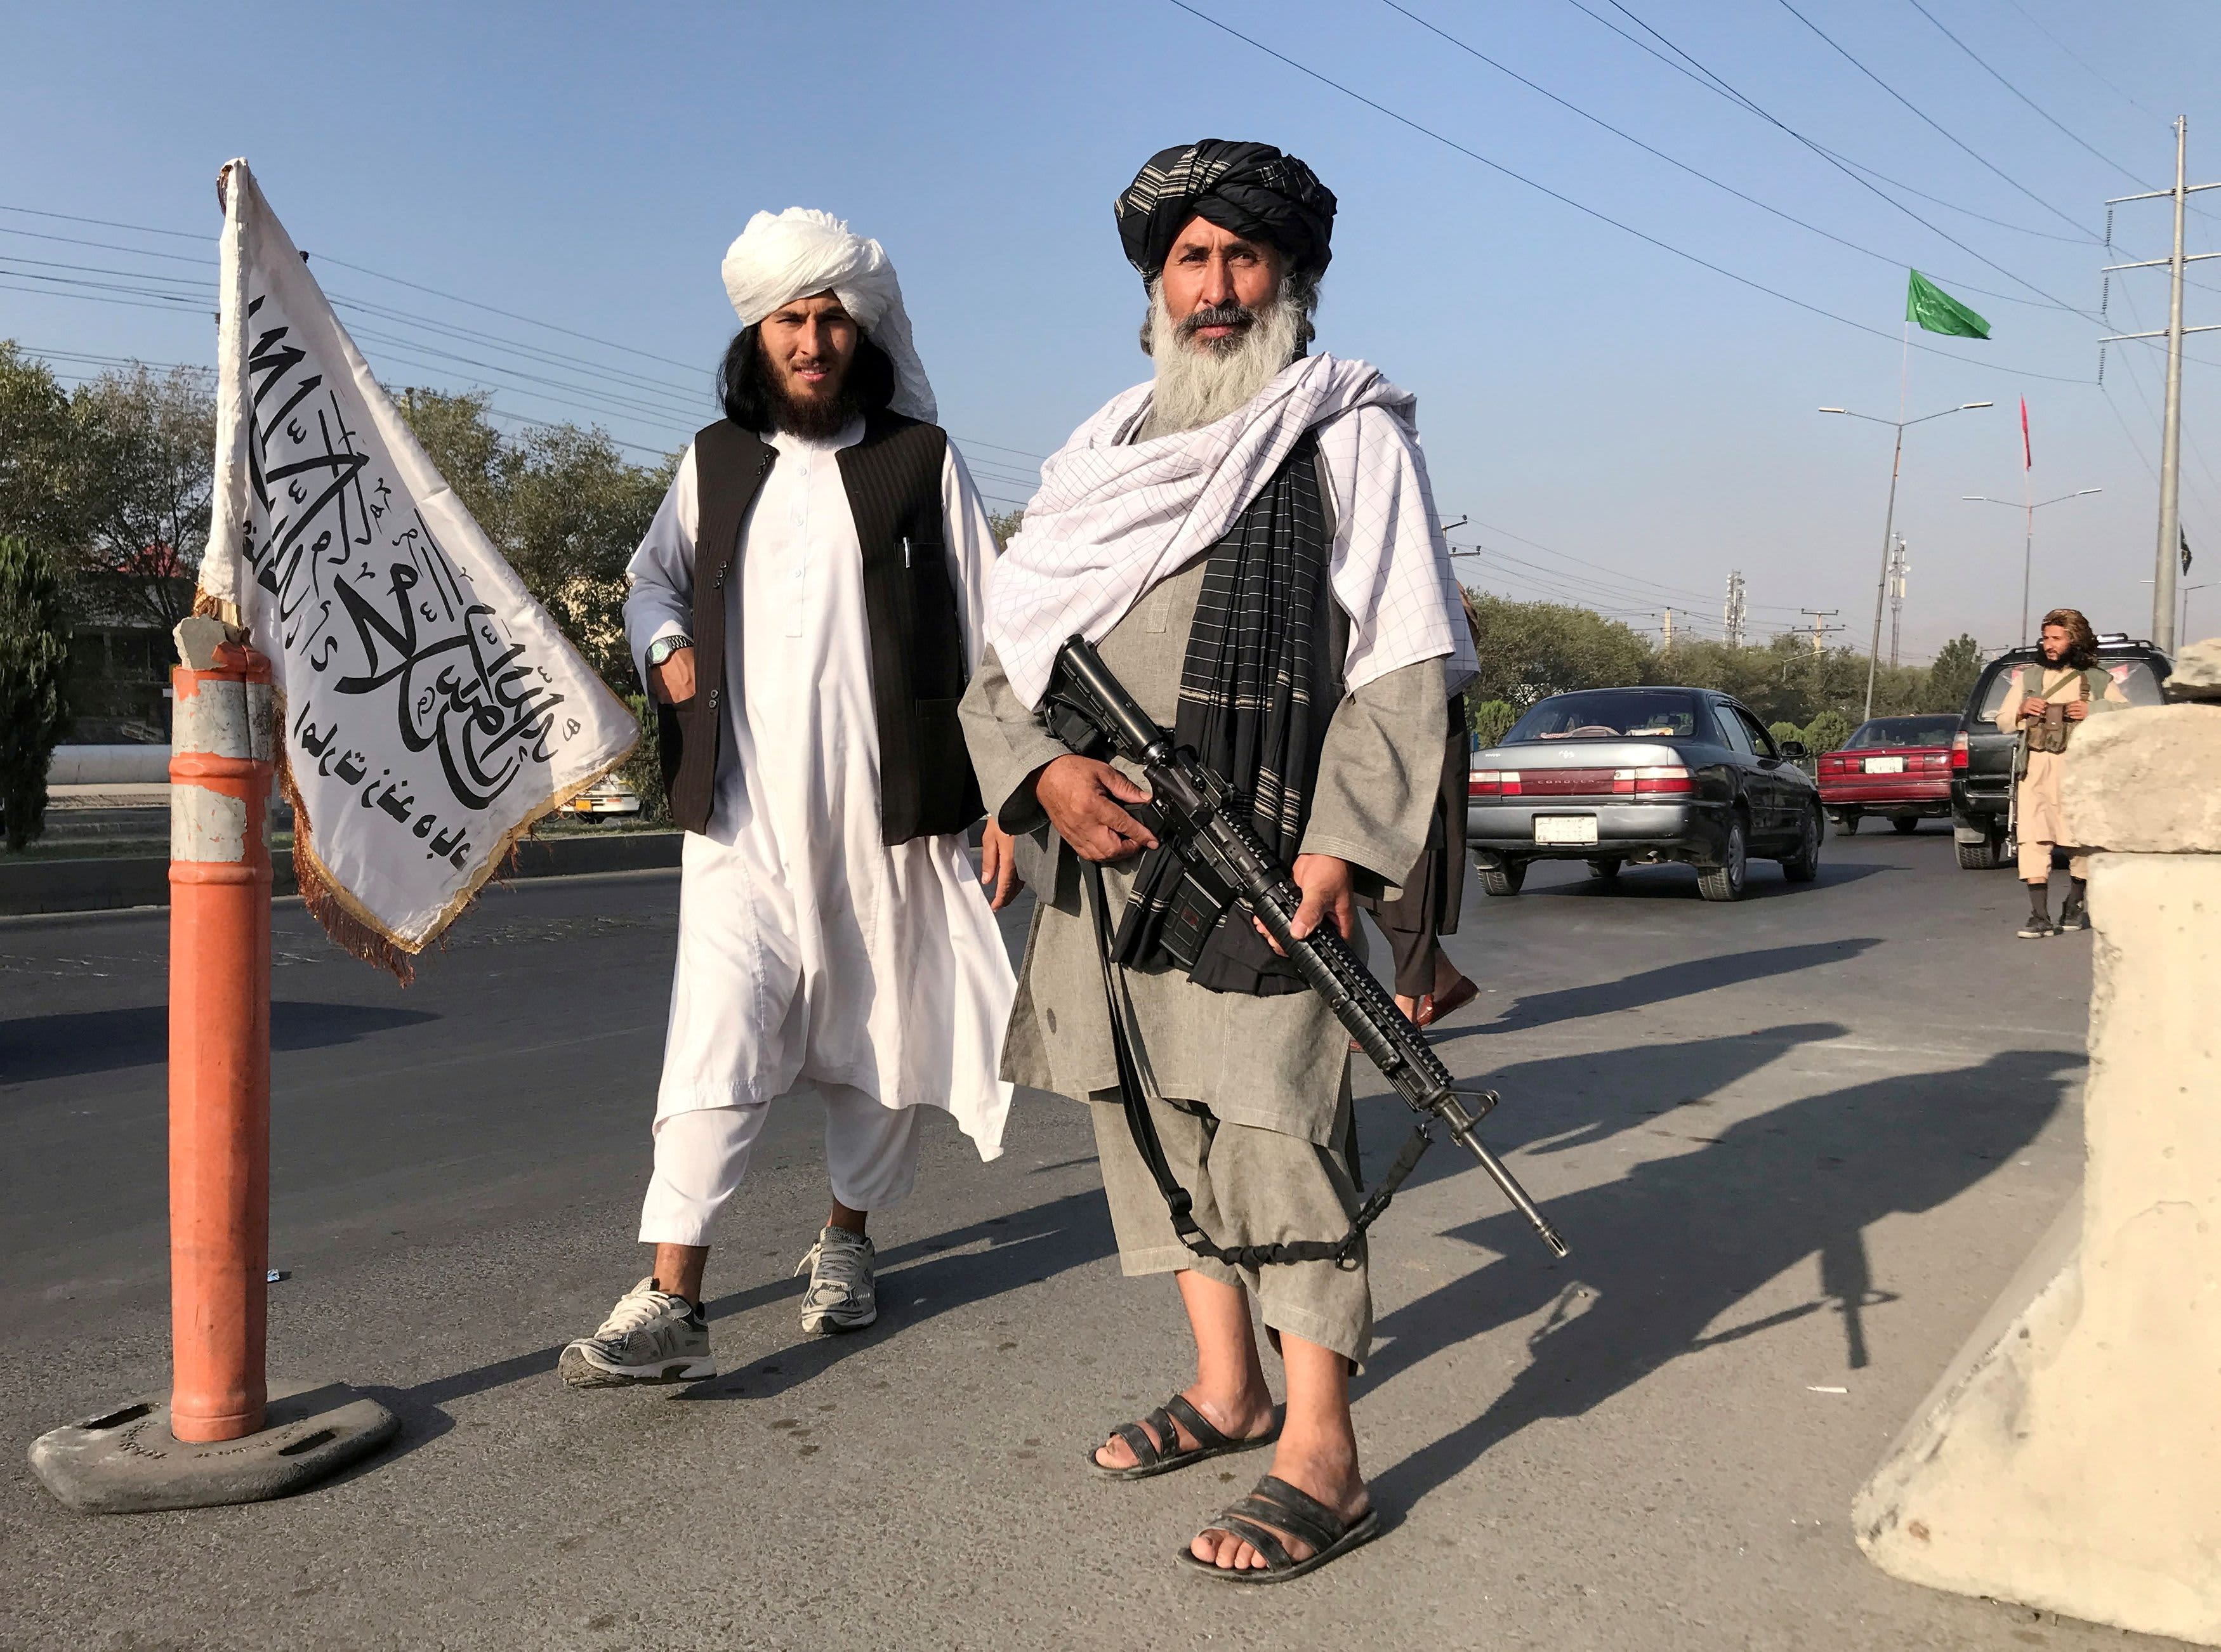 U.S. reliance on the Taliban for safety of its citizens in Afghanistan a ‘risk,’..